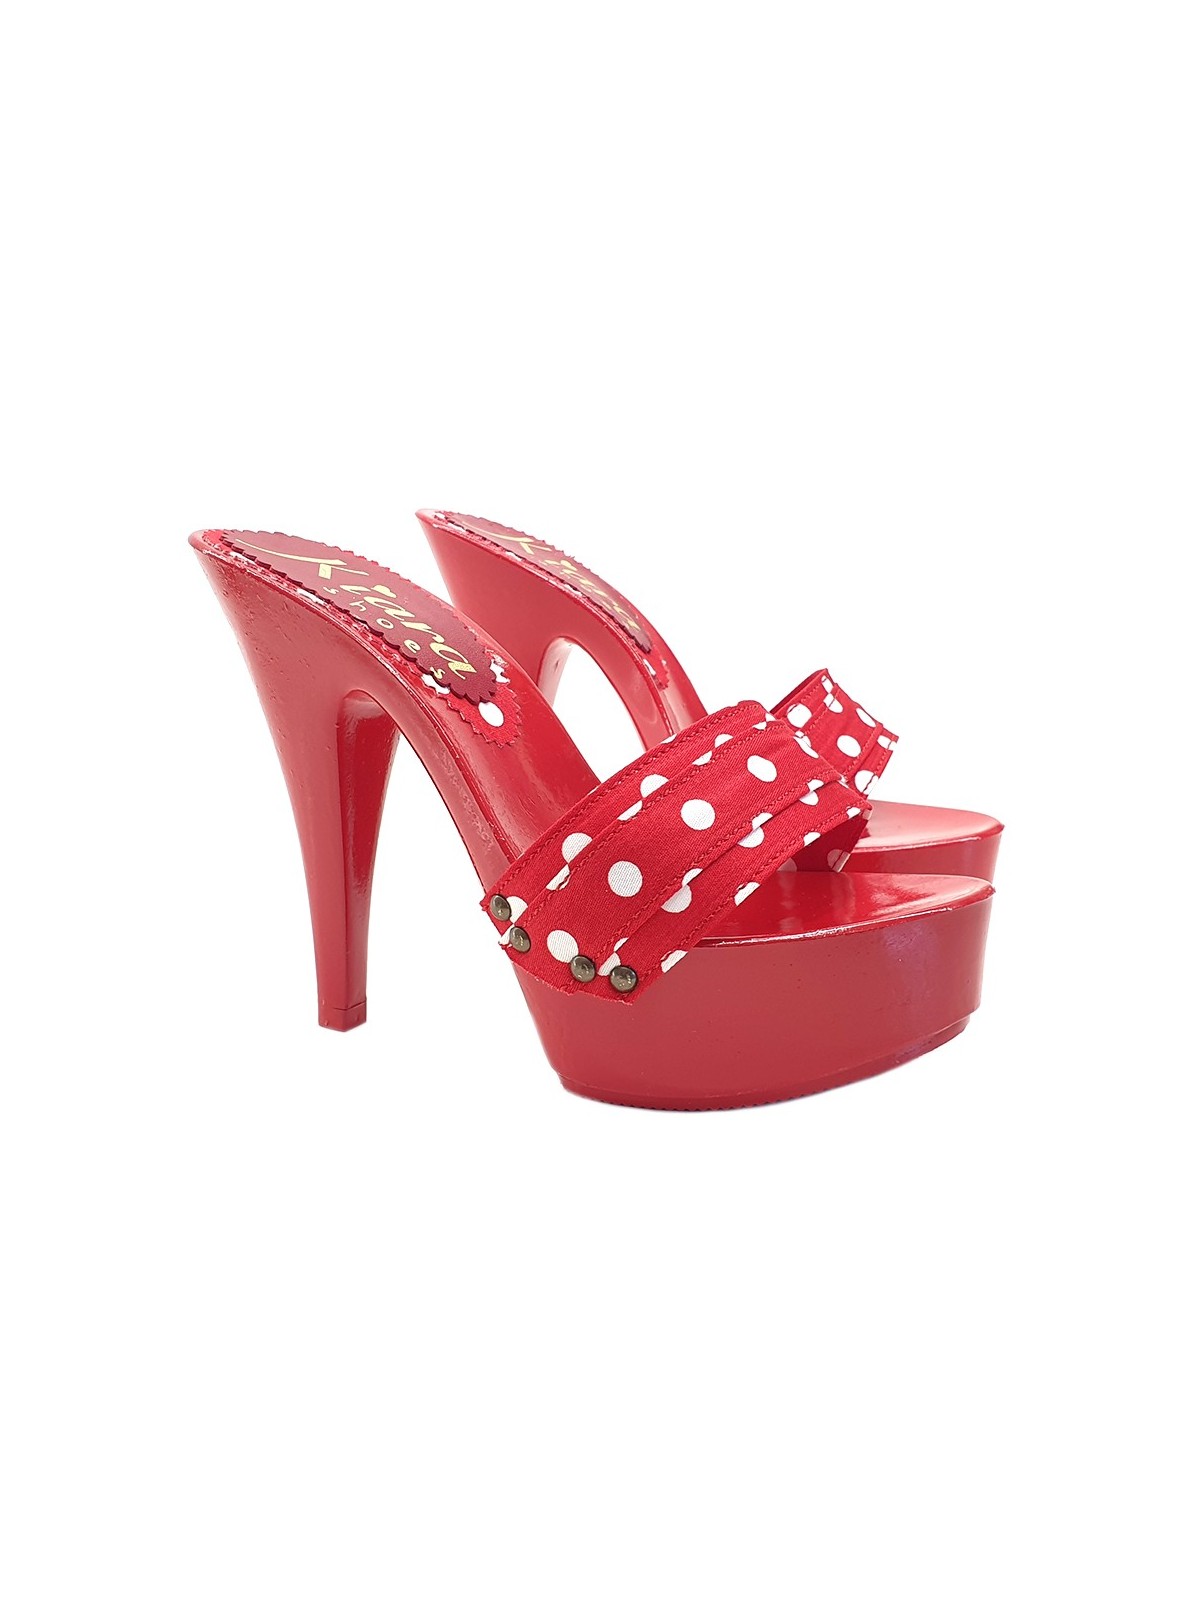 WOMEN'S RED CLOGS WITH POLKA DOT